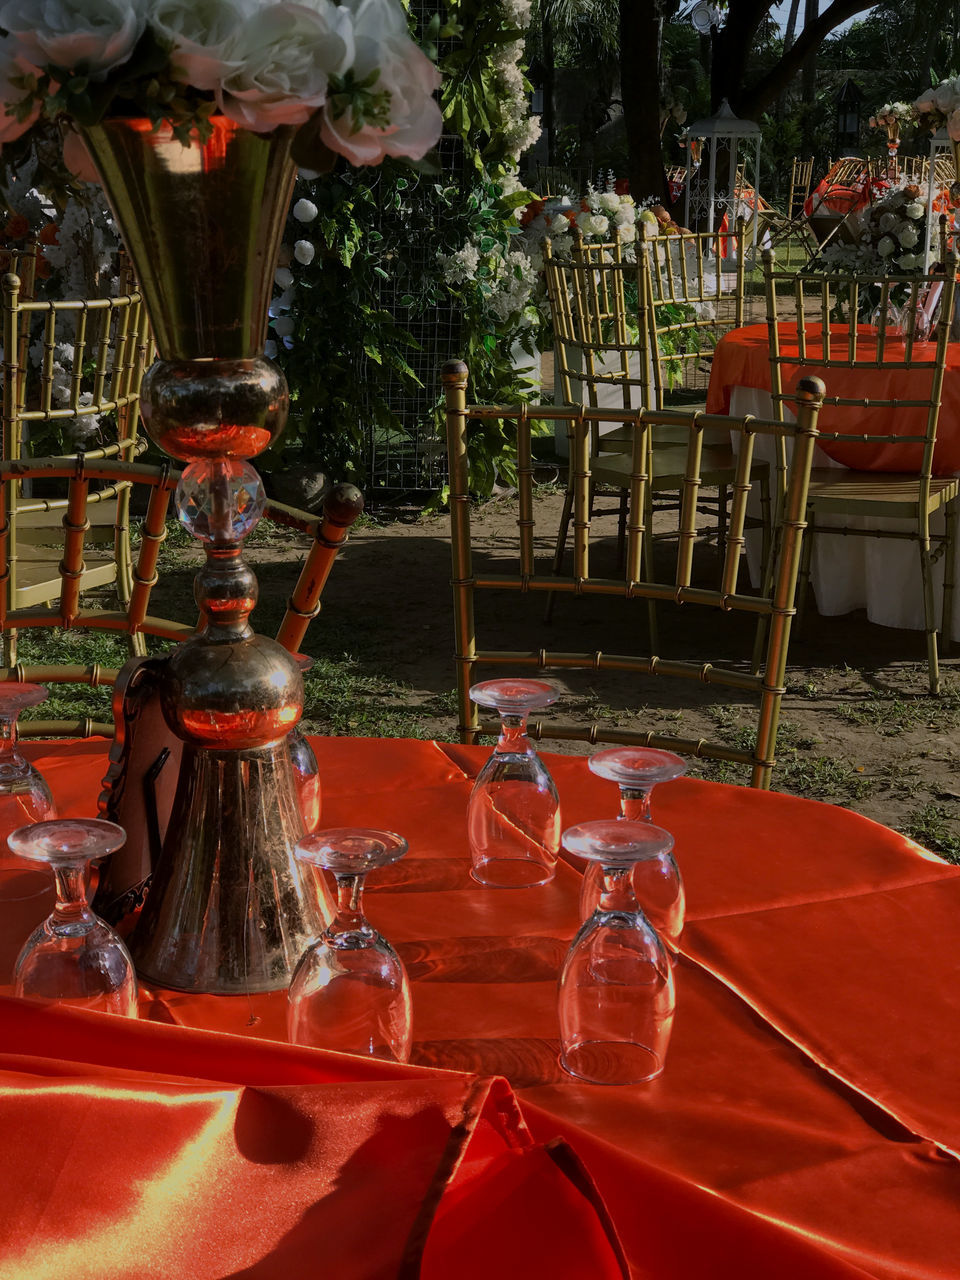 red, table, plant, no people, nature, flower, seat, food and drink, centrepiece, chair, outdoors, glass, wine glass